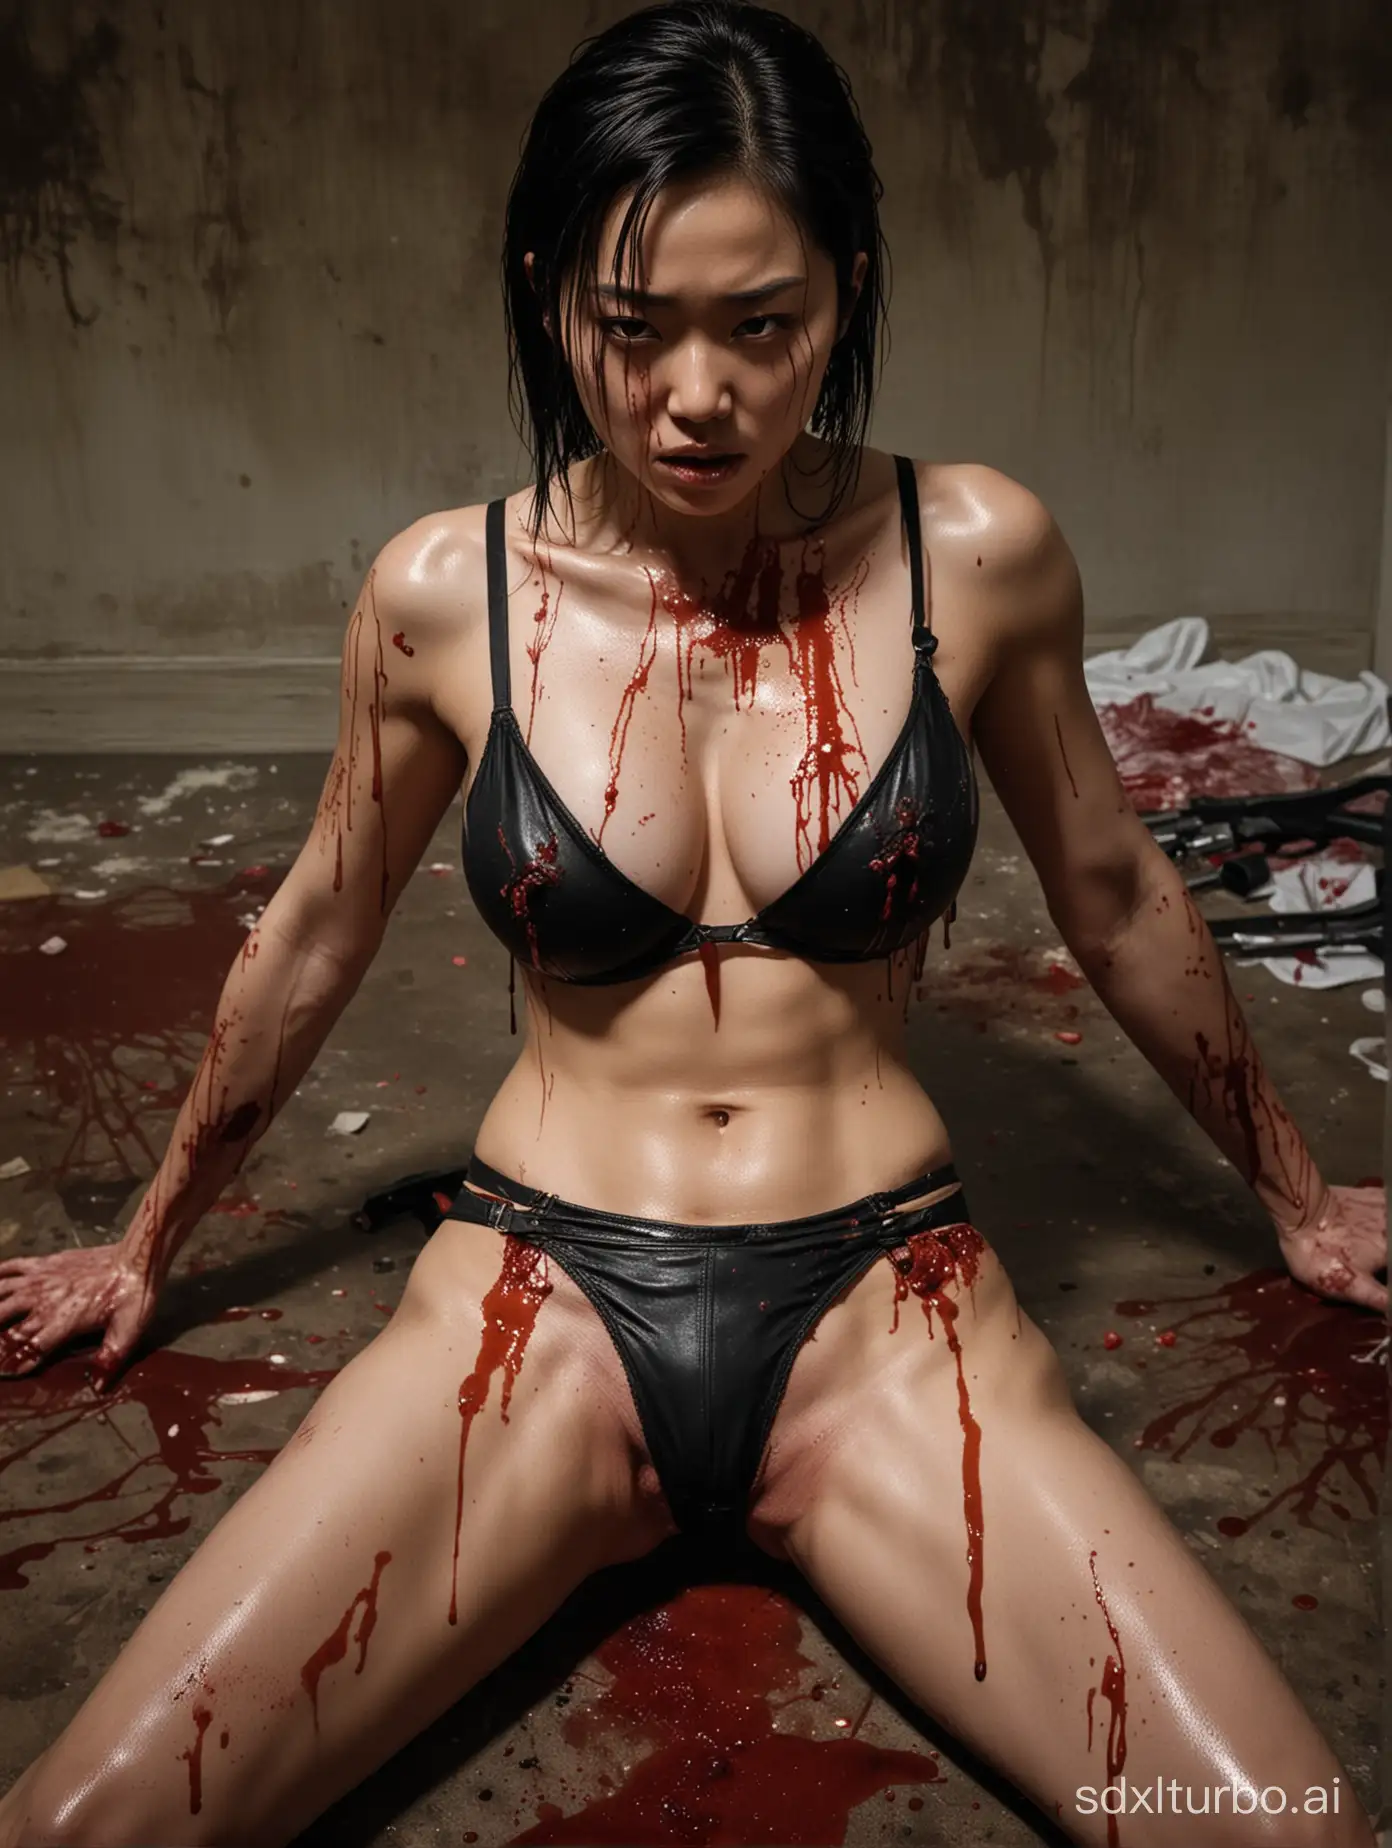 A surreal, gory, erotic scene with a dark, room filled with blood. In the corner, a strong Chinese female antagonist with coffee skin and muscular body dead on the ground, wearing a sexy black broken bra, splitting blood. She has been shot twice in the left breast and once in the center of the right breast. Her face, breasts, and muscles are covered in blood. Despite her severe injuries, she bravely (holds a gun and tries to shoot forward:1.3),